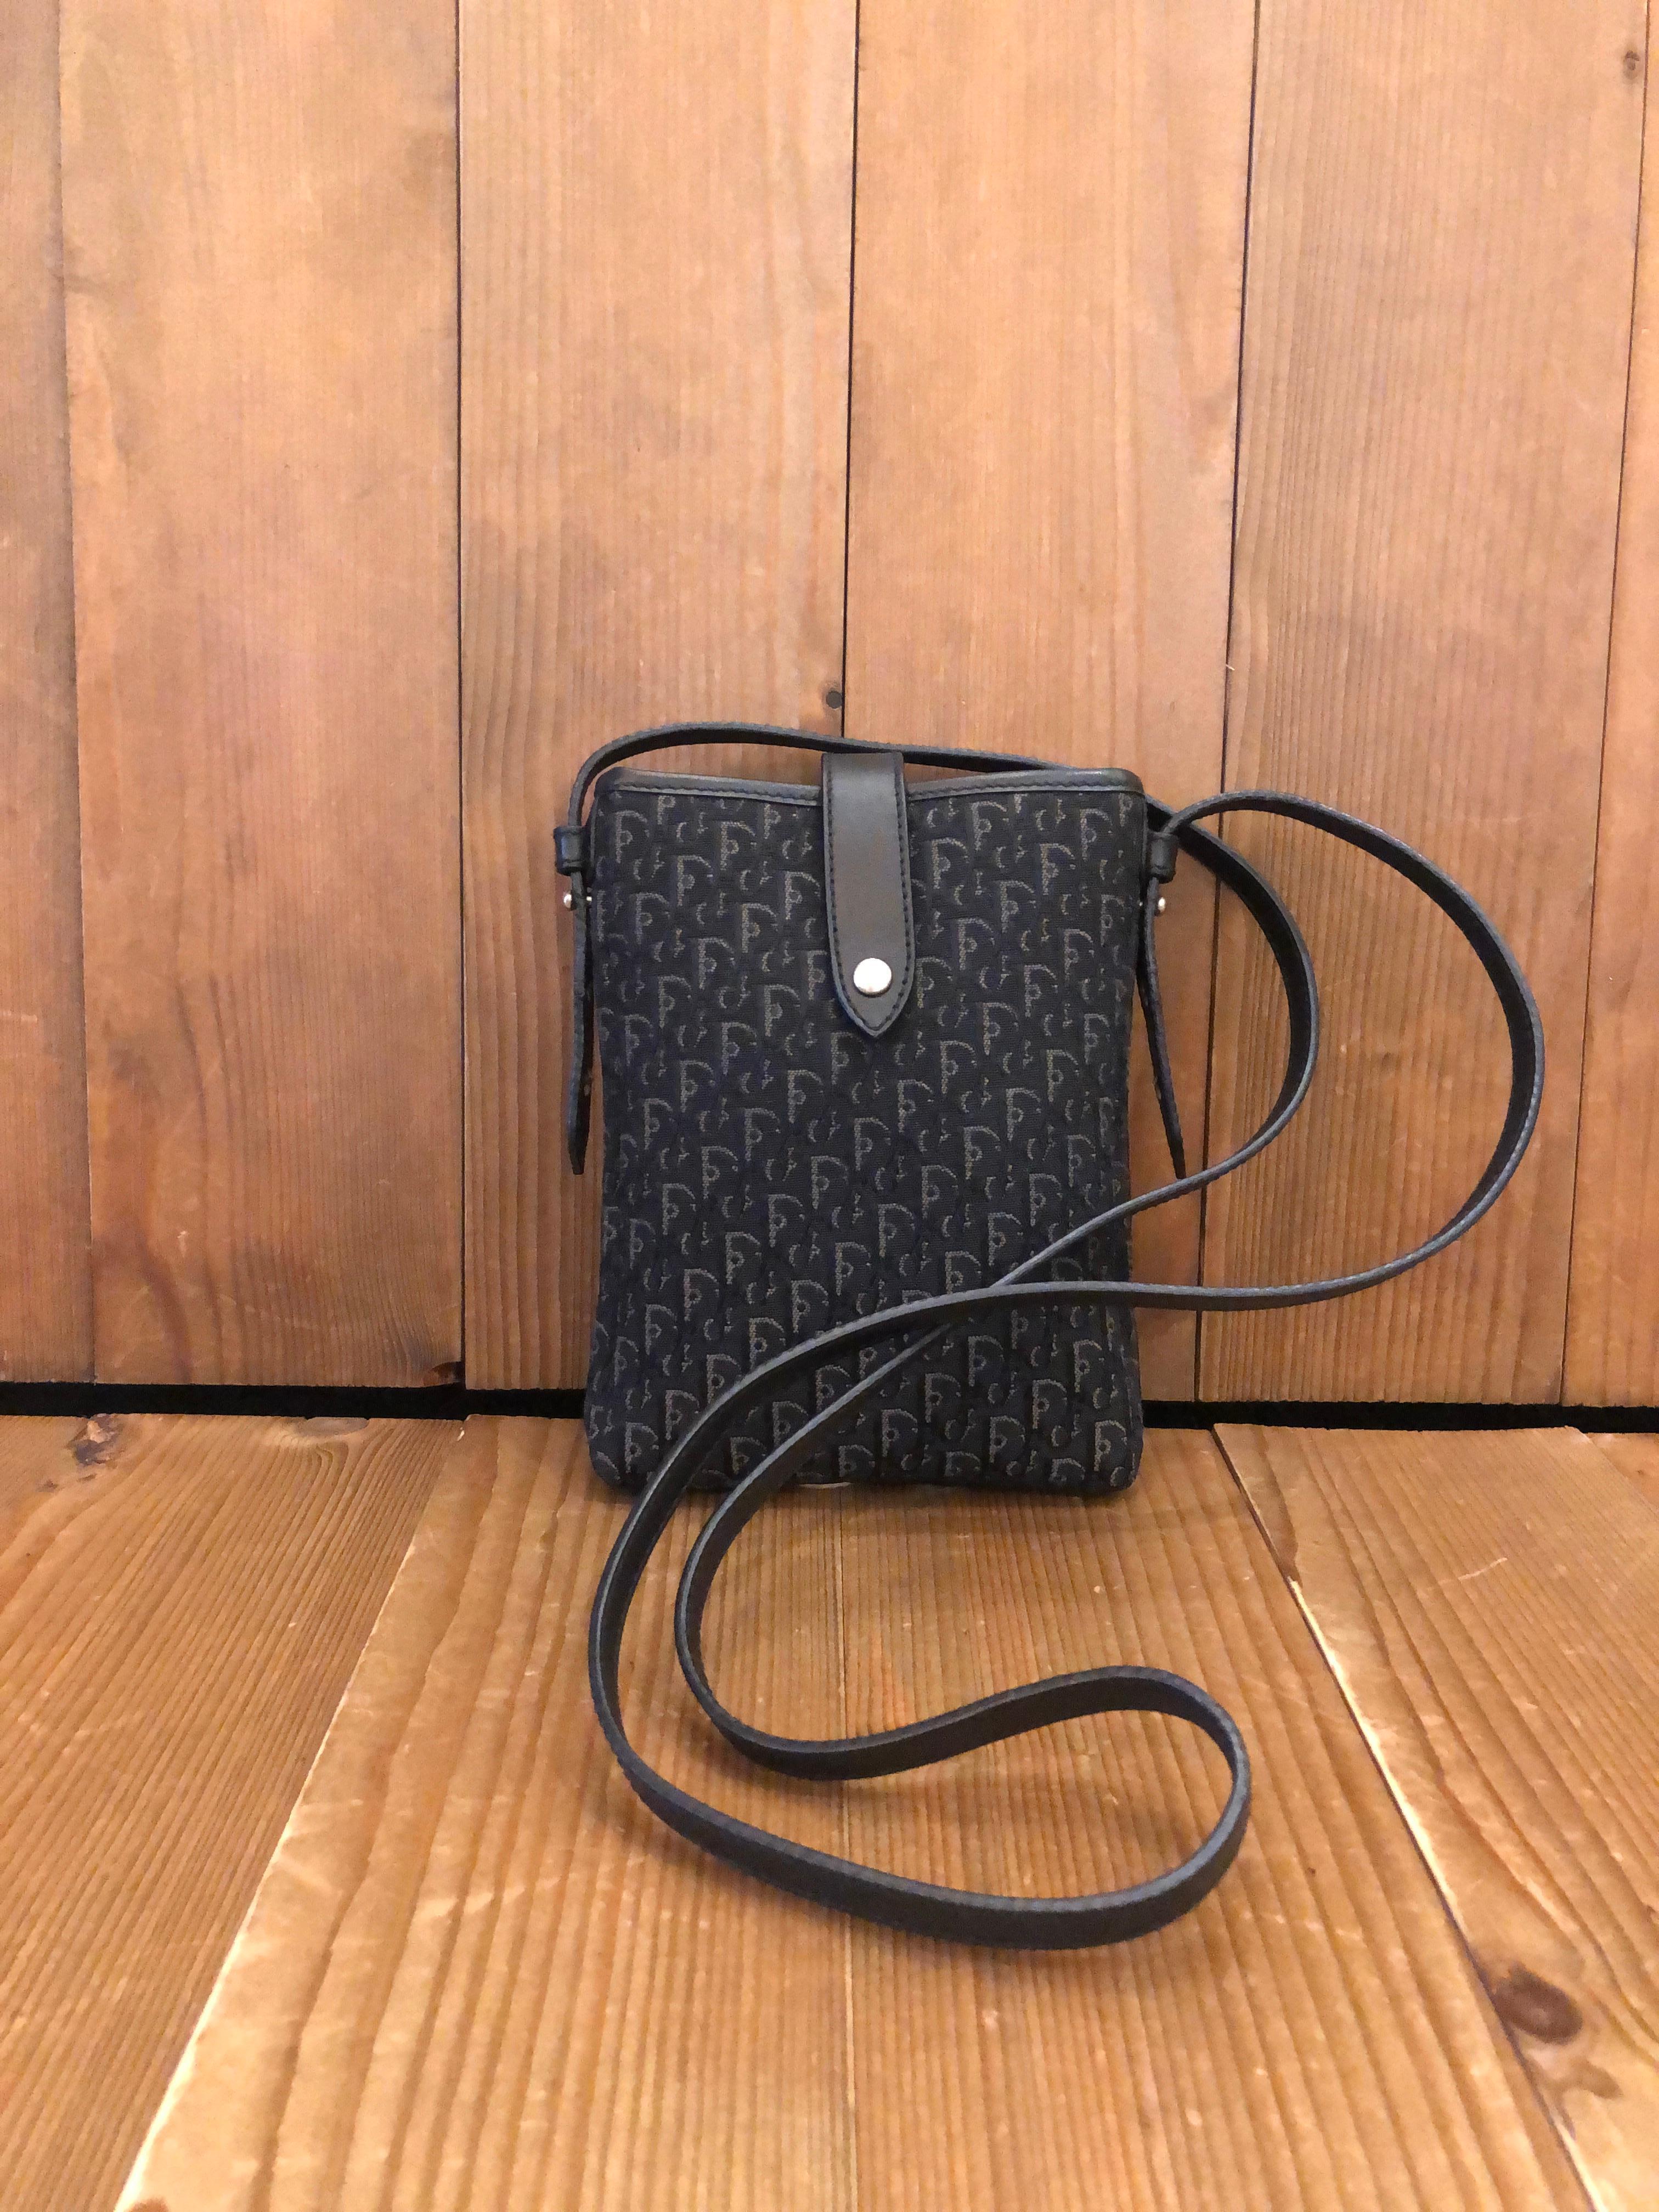 2003 Christian Dior crossbody cell phone pouch in black trotter jacquard and smooth leather in black. Top cross over belt closure with snap fastening. Made in Italy. Measures approximately 7 x 5 x 0.75 inches Strap drop 21 inches.

Condition: Minor